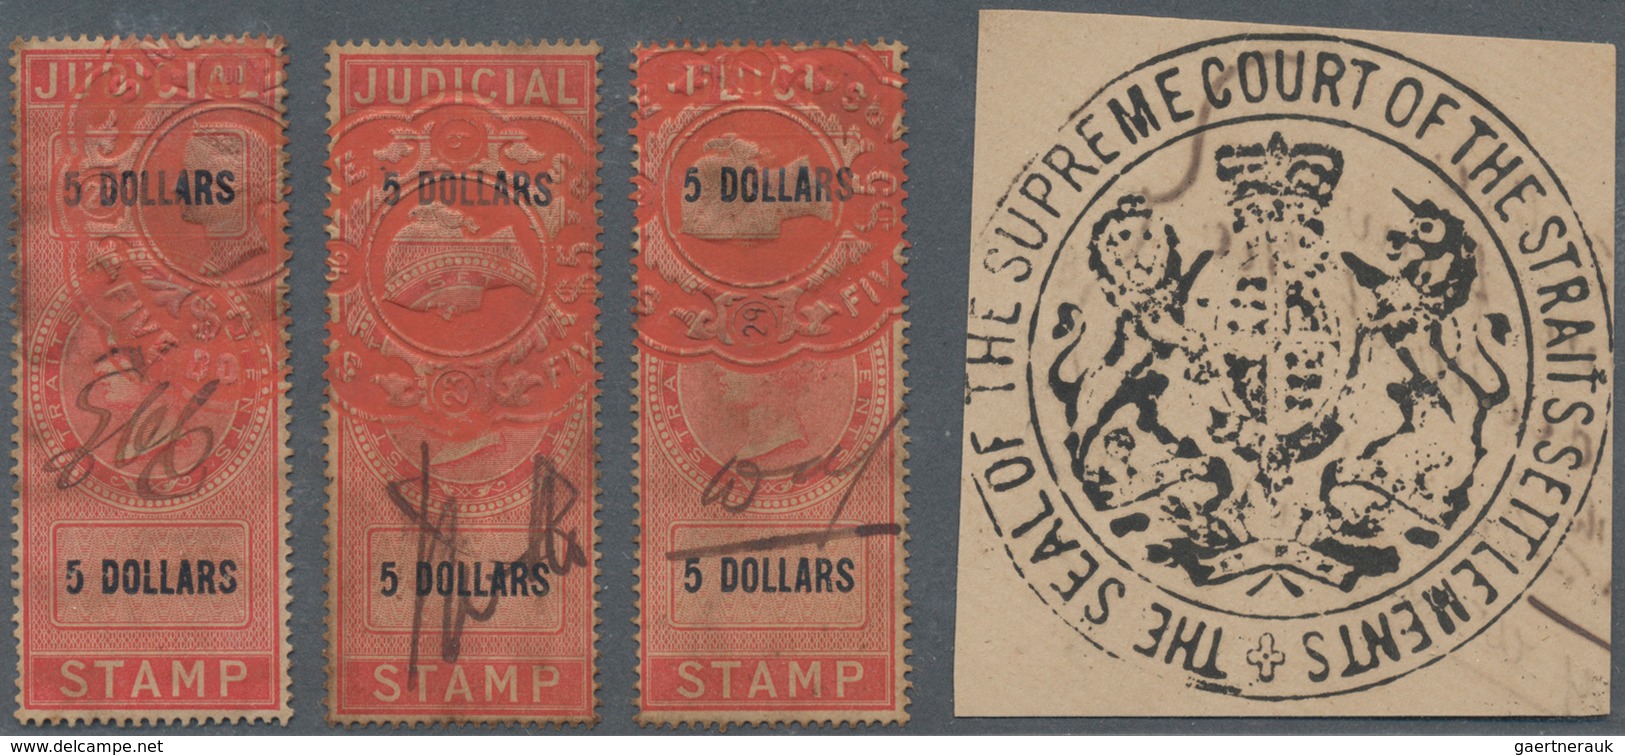 Malaiische Staaten - Straits Settlements: 1870's-1890's: Hundreds of Revenue and Judical stamps, up